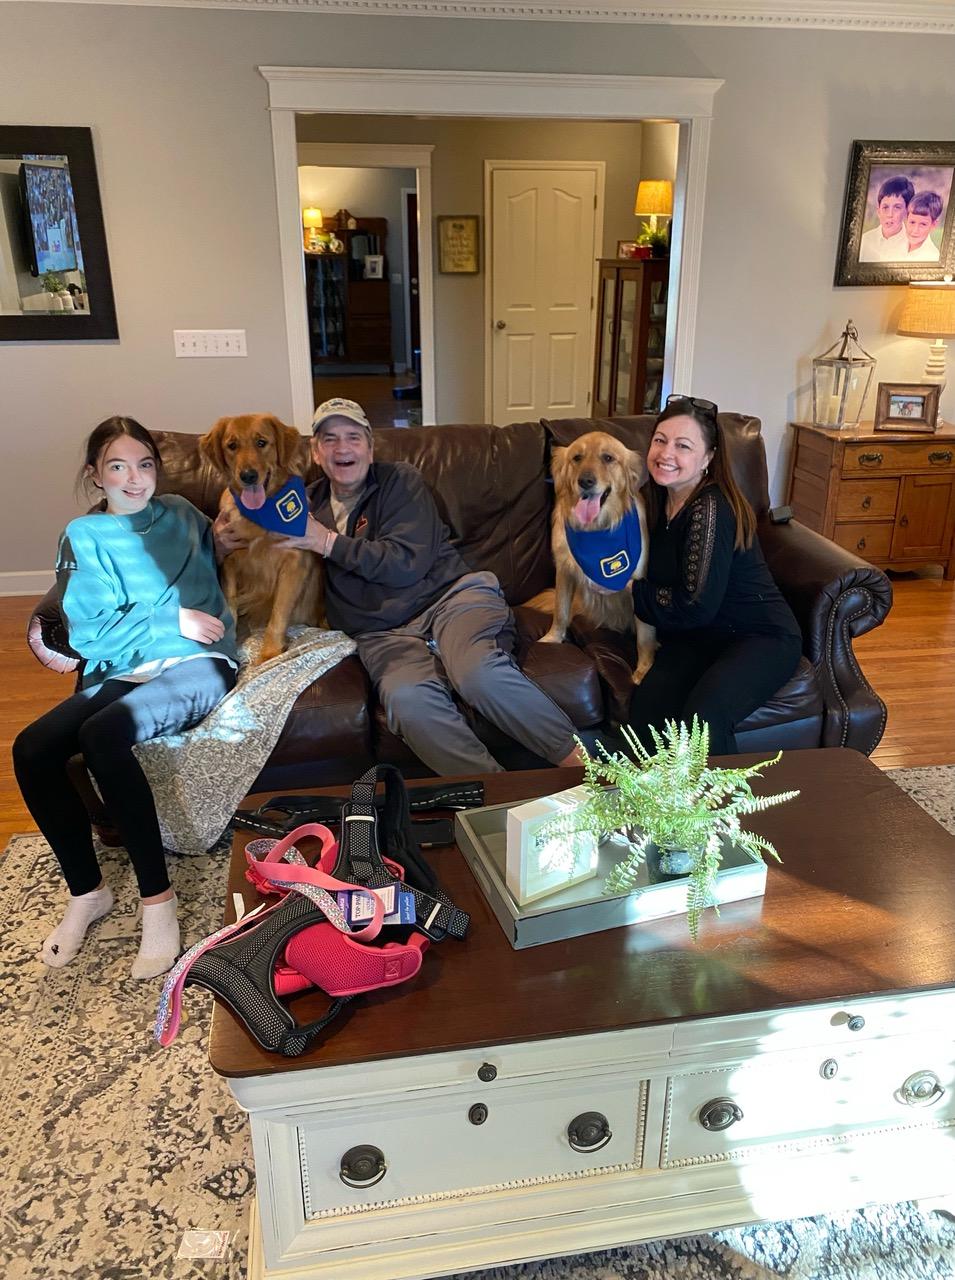 Family of three sitting on couch with two golden retrievers